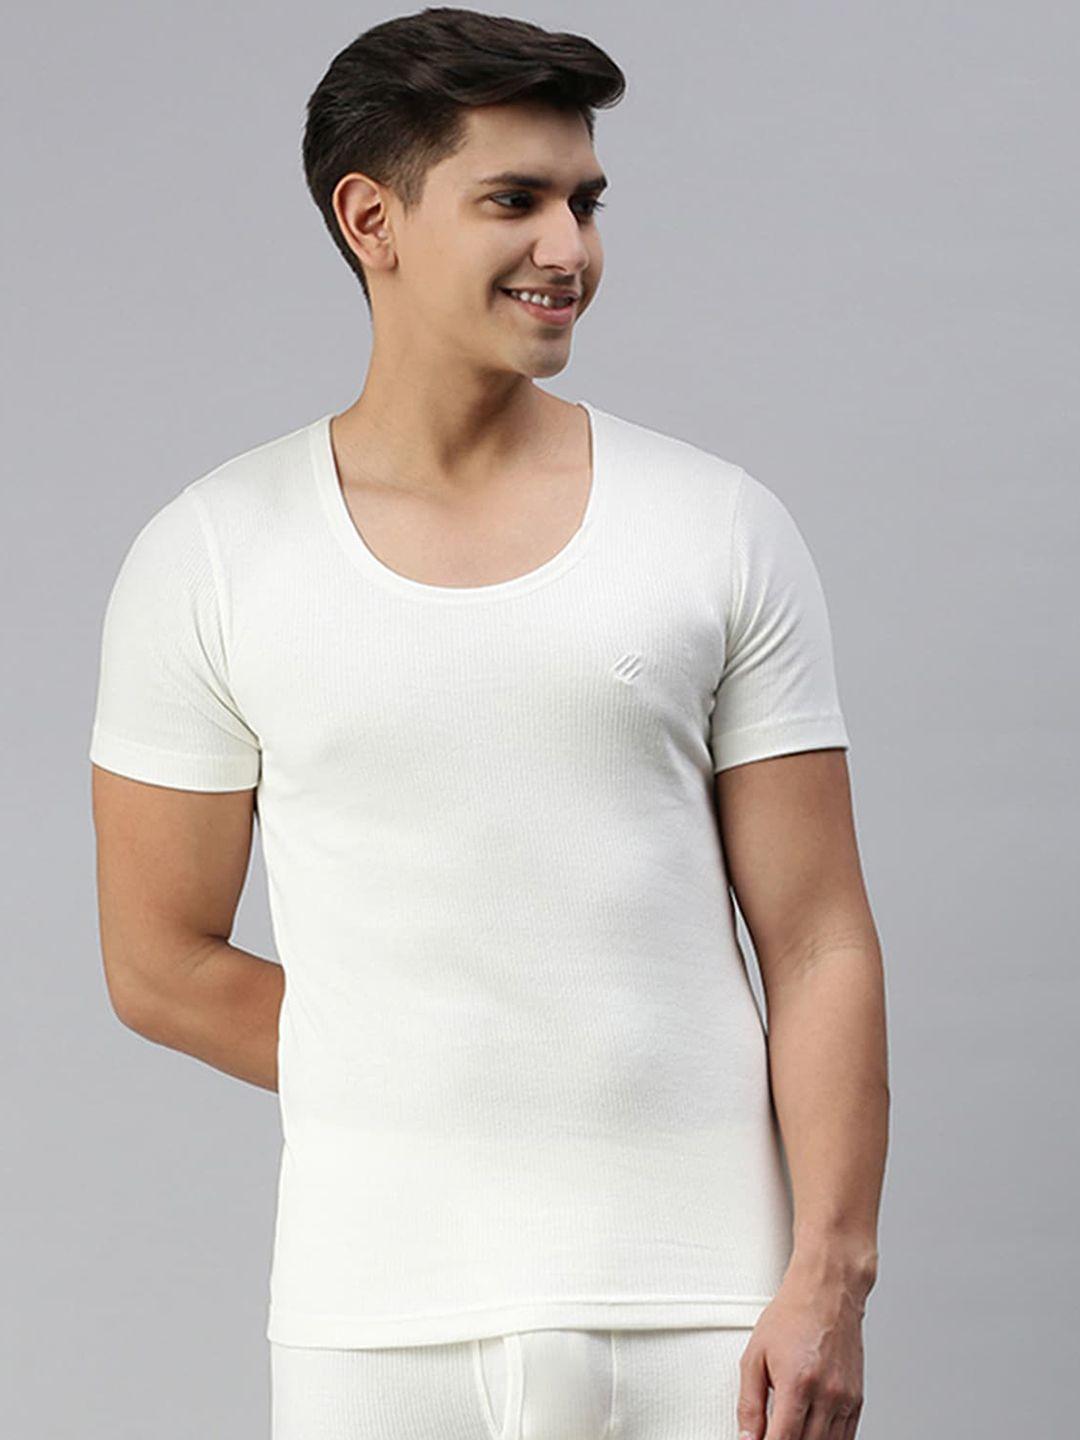 onn cotton slim-fit thermal top